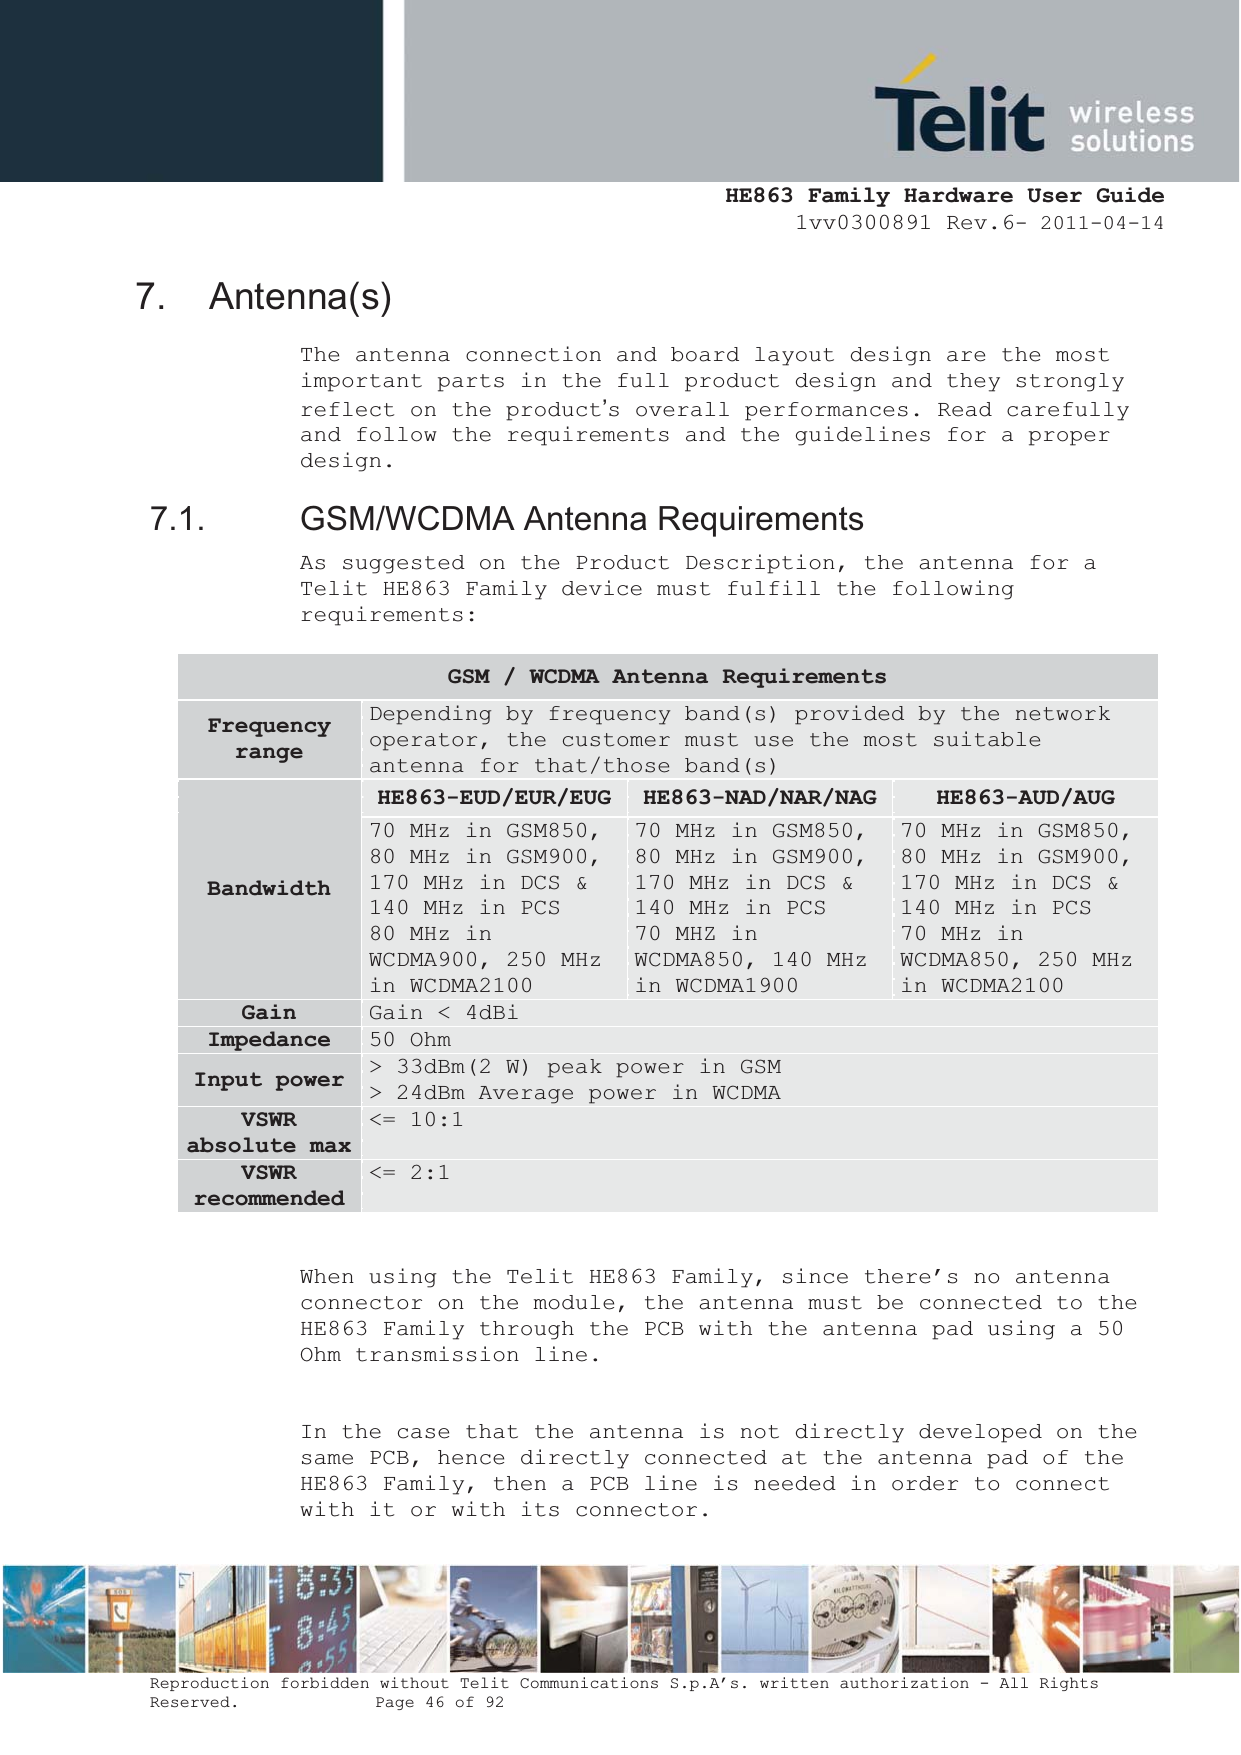  HE863 Family Hardware User Guide 1vv0300891 Rev.6- 2011-04-14    Reproduction forbidden without Telit Communications S.p.A’s. written authorization - All Rights Reserved.    Page 46 of 92  7. Antenna(s) The antenna connection and board layout design are the most important parts in the full product design and they strongly reflect on the product’s overall performances. Read carefully and follow the requirements and the guidelines for a proper design. 7.1. GSM/WCDMA Antenna Requirements As suggested on the Product Description, the antenna for a Telit HE863 Family device must fulfill the following requirements:  When using the Telit HE863 Family, since there’s no antenna connector on the module, the antenna must be connected to the HE863 Family through the PCB with the antenna pad using a 50 Ohm transmission line.  In the case that the antenna is not directly developed on the same PCB, hence directly connected at the antenna pad of the HE863 Family, then a PCB line is needed in order to connect with it or with its connector. GSM / WCDMA Antenna Requirements FrequencyrangeDepending by frequency band(s) provided by the network operator, the customer must use the most suitable antenna for that/those band(s) BandwidthHE863-EUD/EUR/EUG HE863-NAD/NAR/NAG HE863-AUD/AUG70 MHz in GSM850, 80 MHz in GSM900, 170 MHz in DCS &amp; 140 MHz in PCS 80 MHz in WCDMA900, 250 MHz in WCDMA2100 70 MHz in GSM850, 80 MHz in GSM900, 170 MHz in DCS &amp; 140 MHz in PCS 70 MHZ in WCDMA850, 140 MHz in WCDMA1900 70 MHz in GSM850, 80 MHz in GSM900, 170 MHz in DCS &amp; 140 MHz in PCS 70 MHz in WCDMA850, 250 MHz in WCDMA2100 Gain Gain &lt; 4dBi Impedance 50 Ohm Input power  &gt; 33dBm(2 W) peak power in GSM &gt; 24dBm Average power in WCDMA VSWRabsolute max &lt;= 10:1 VSWRrecommended&lt;= 2:1 